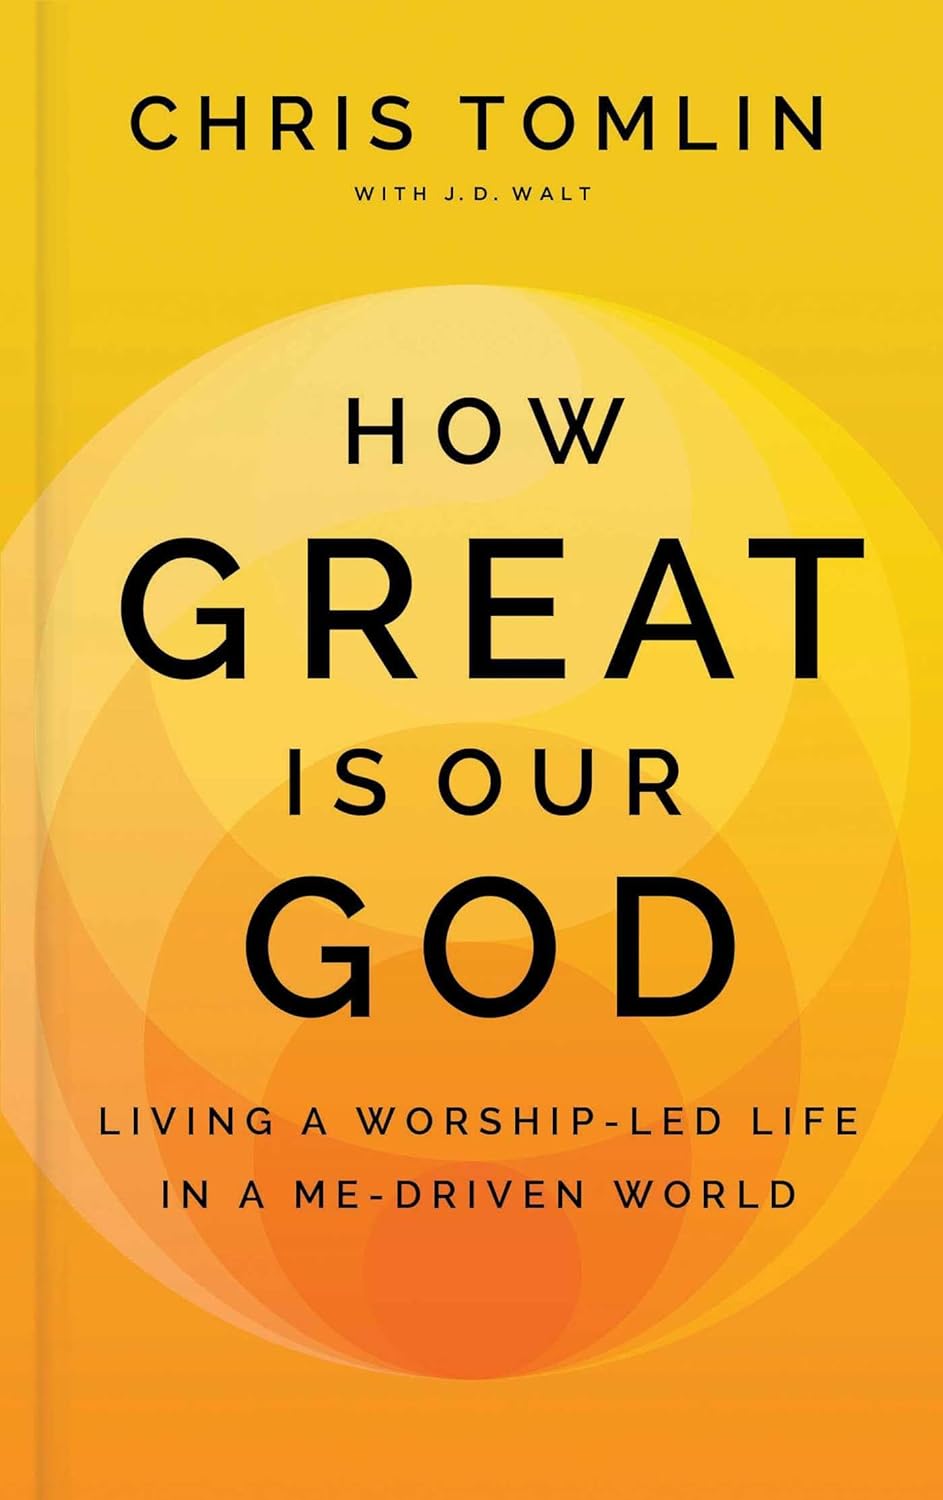 How Great Is Our God - Living a Worship-Led Life in a Me-Driven World